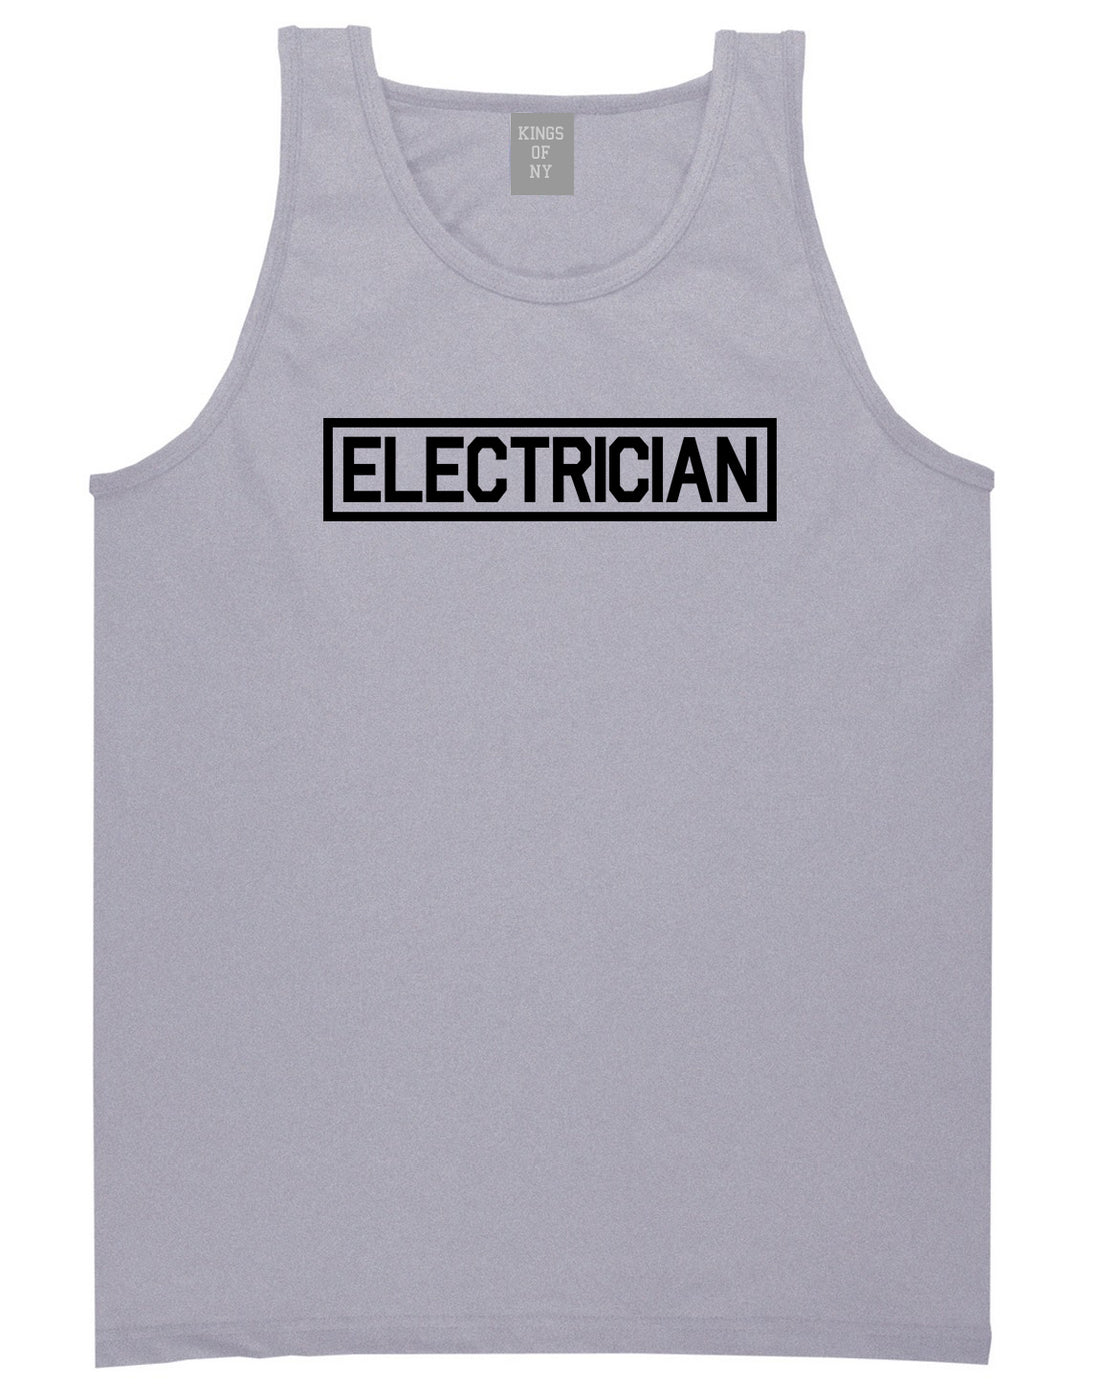 Electrician_Occupation Mens Grey Tank Top Shirt by Kings Of NY